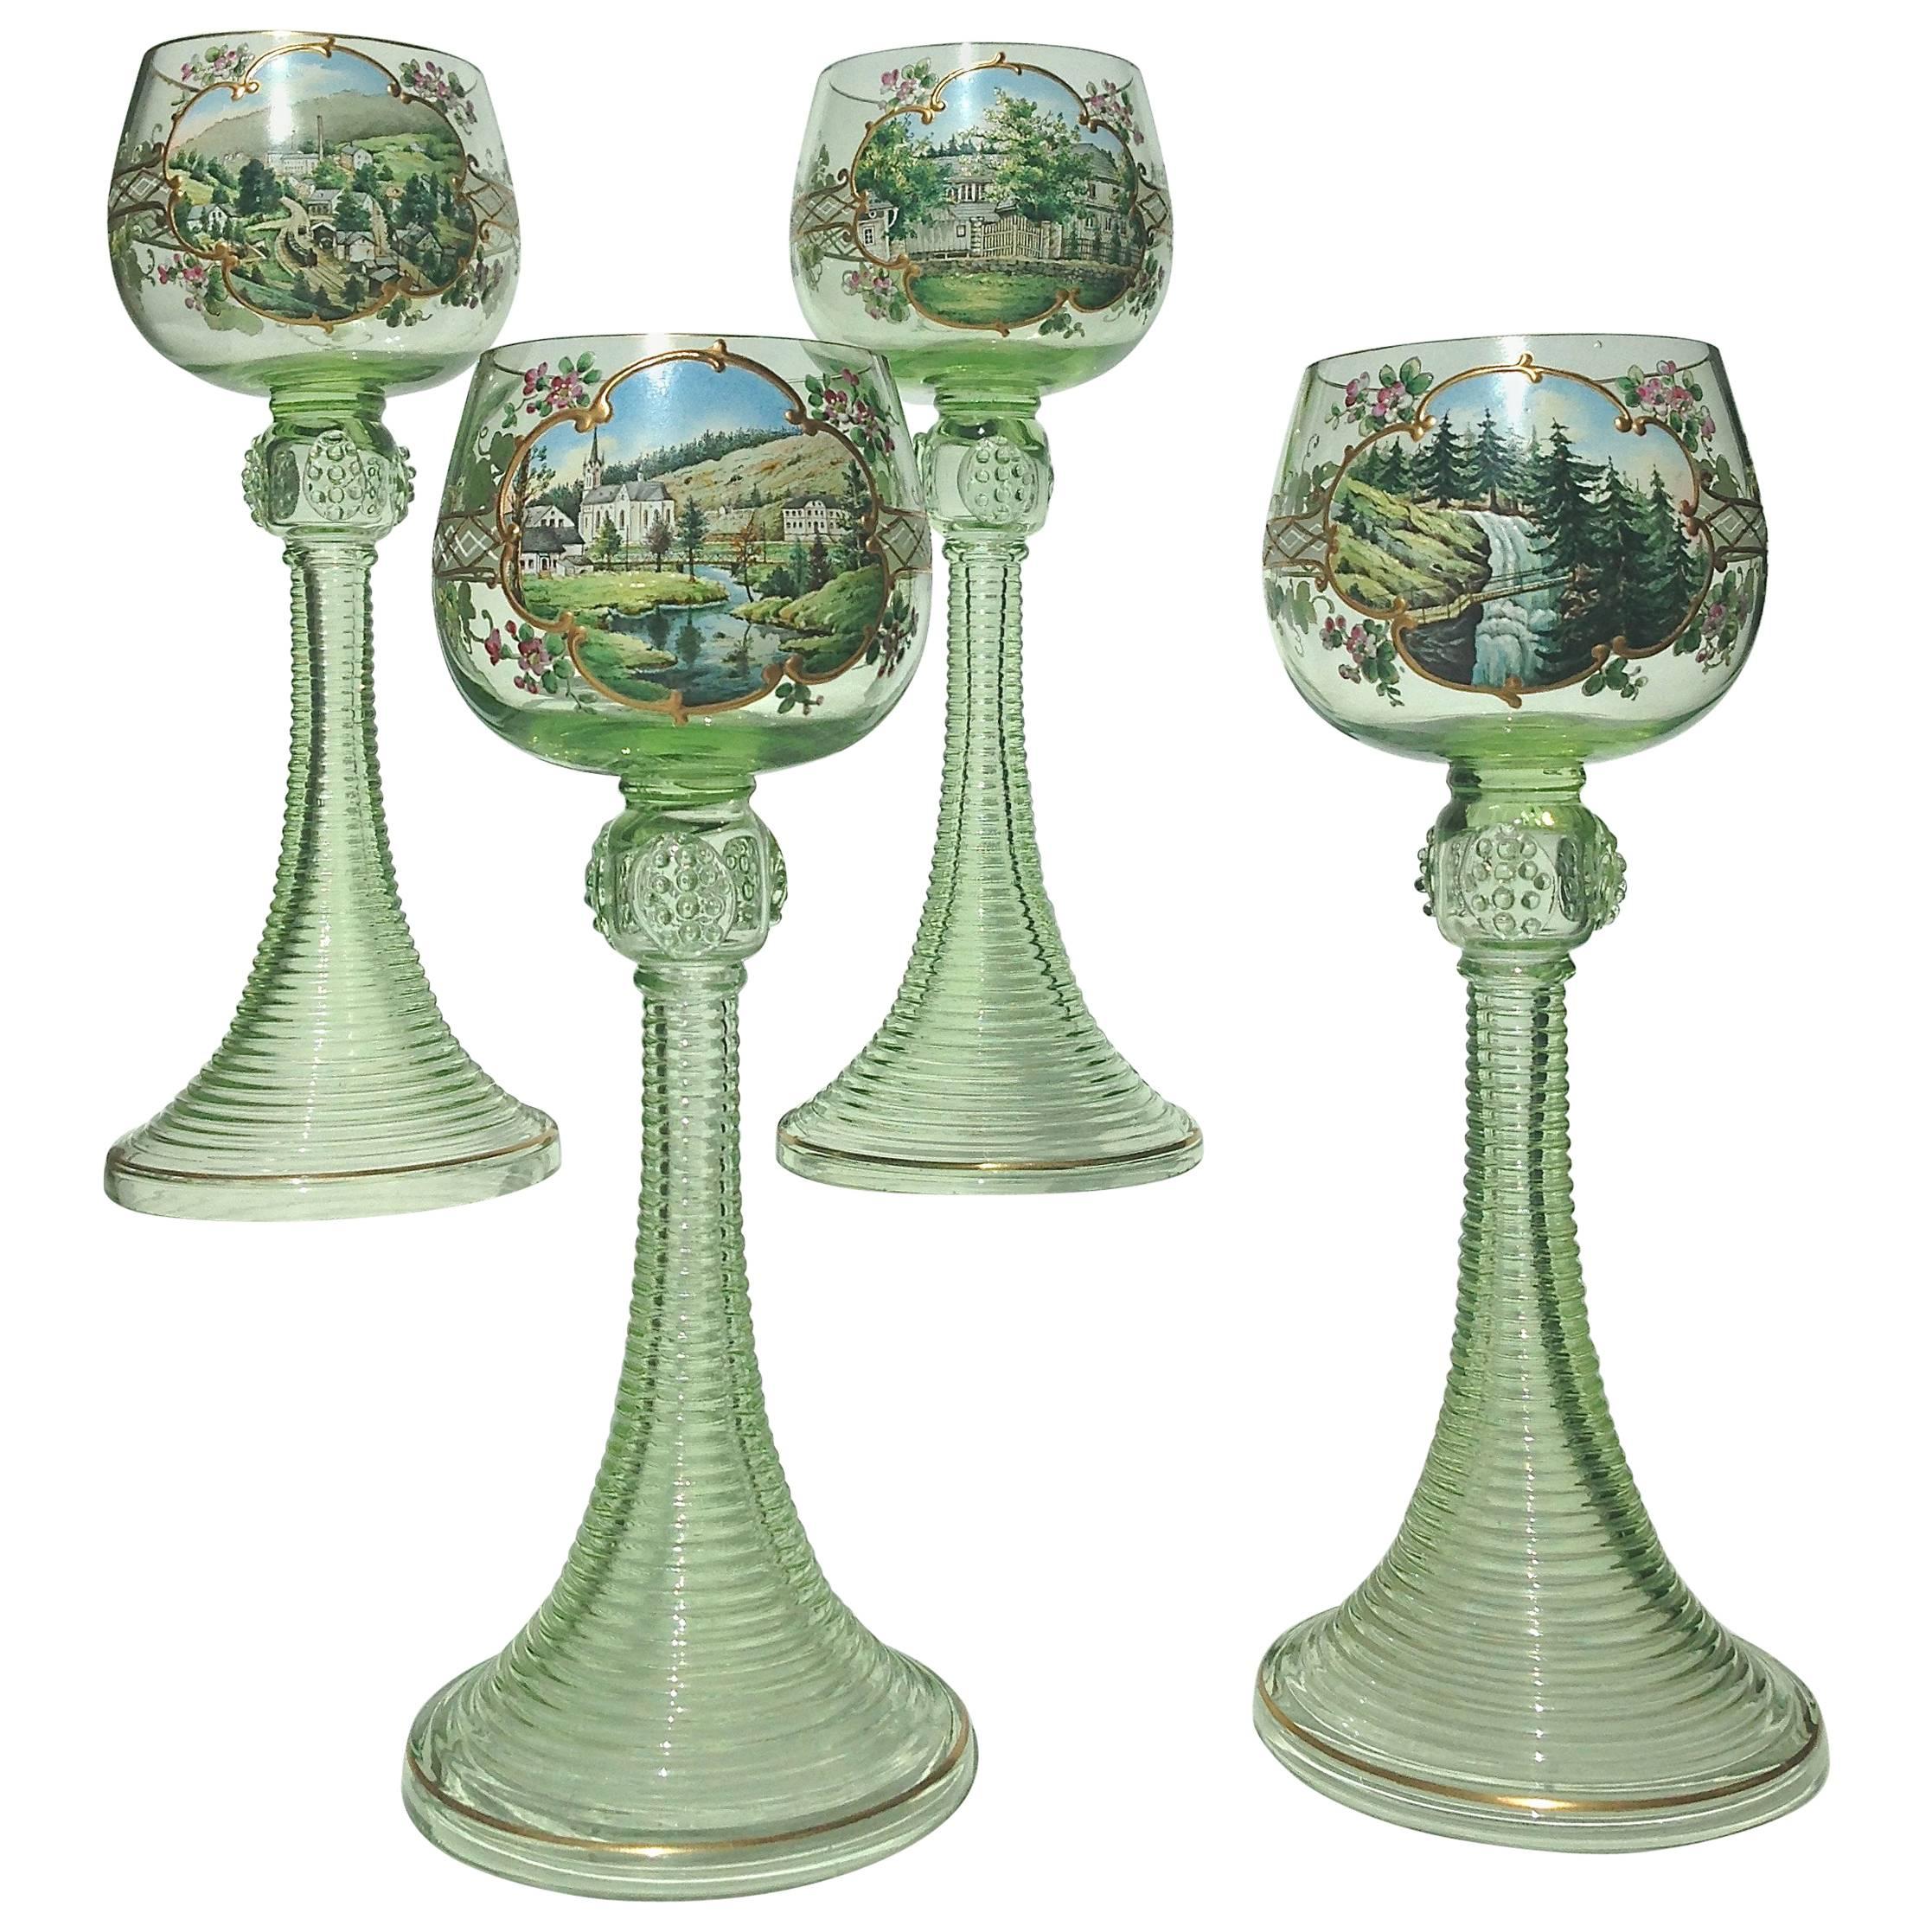 Moser Glass Enameled Landscape and Architectural Scenes, circa 1890 For Sale